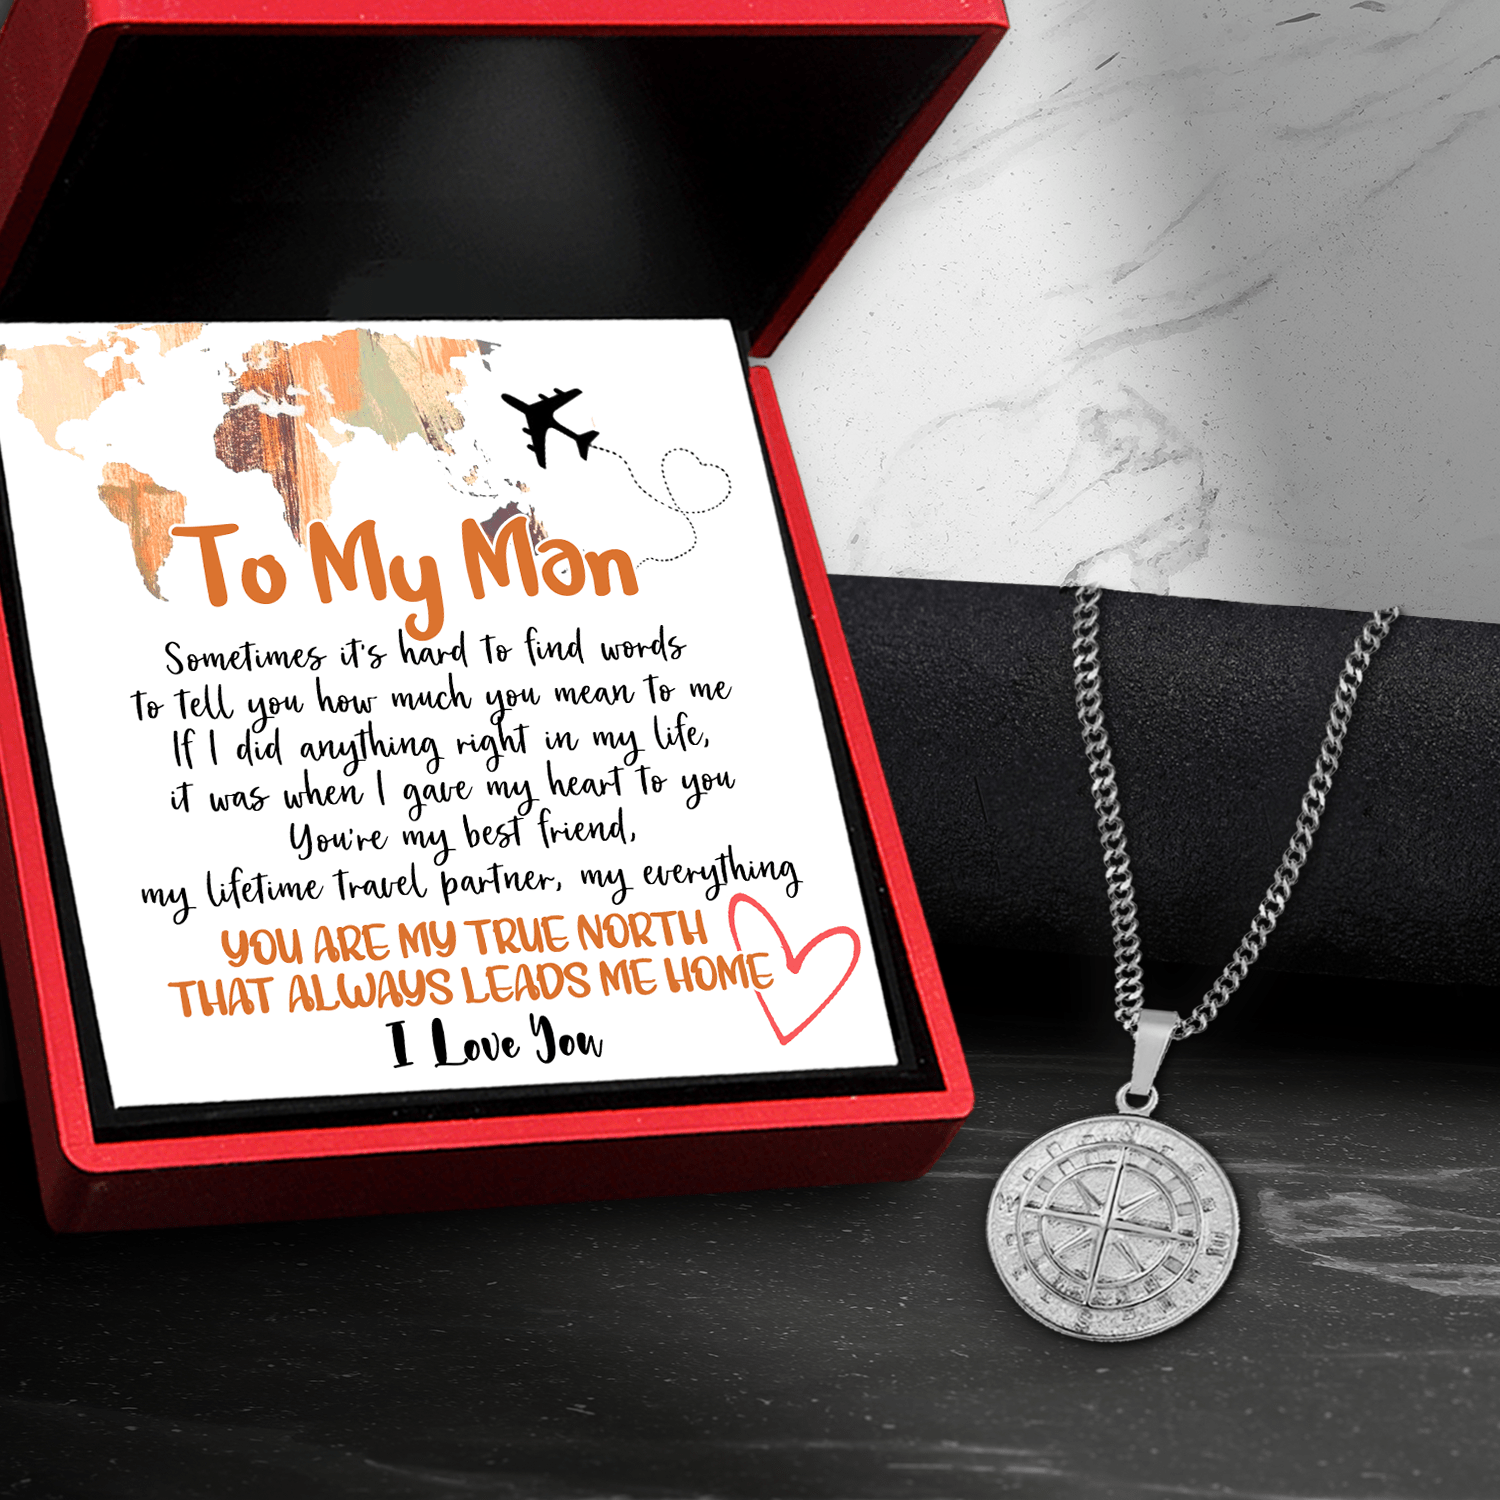 Men's My Love Man Necklace In Silver